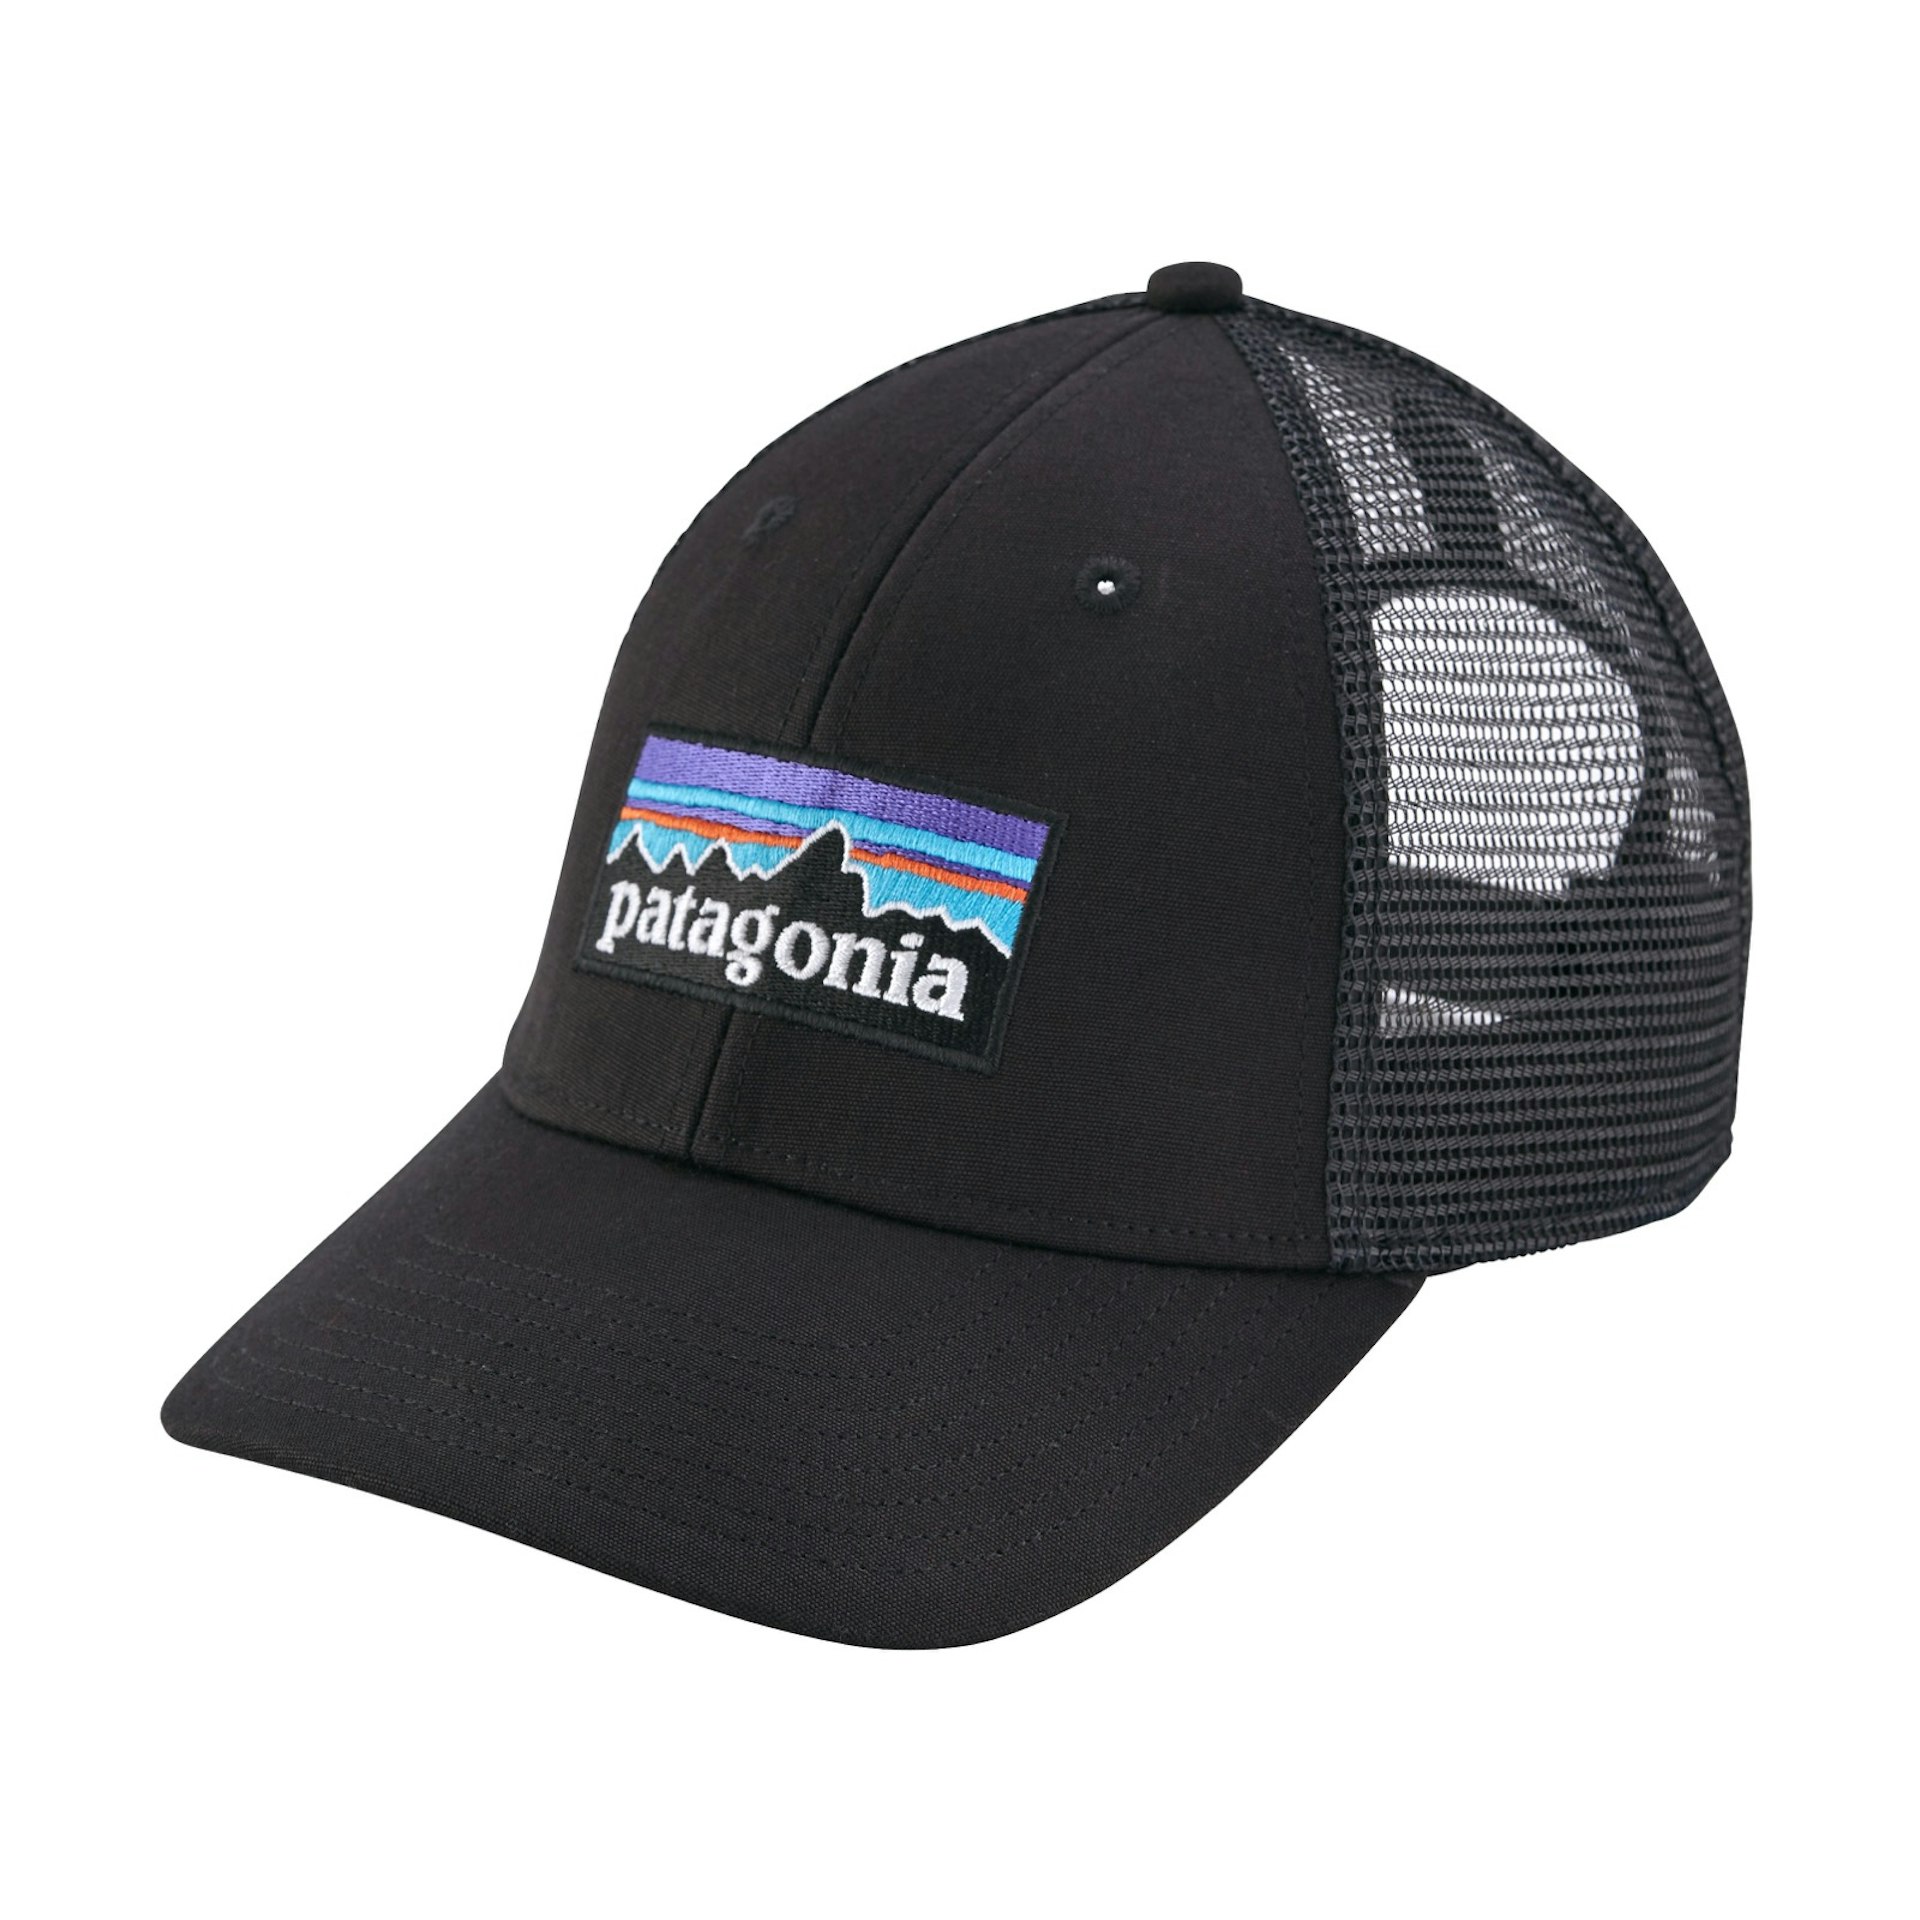 Black brimmed hat with mess back and Patagonia logo